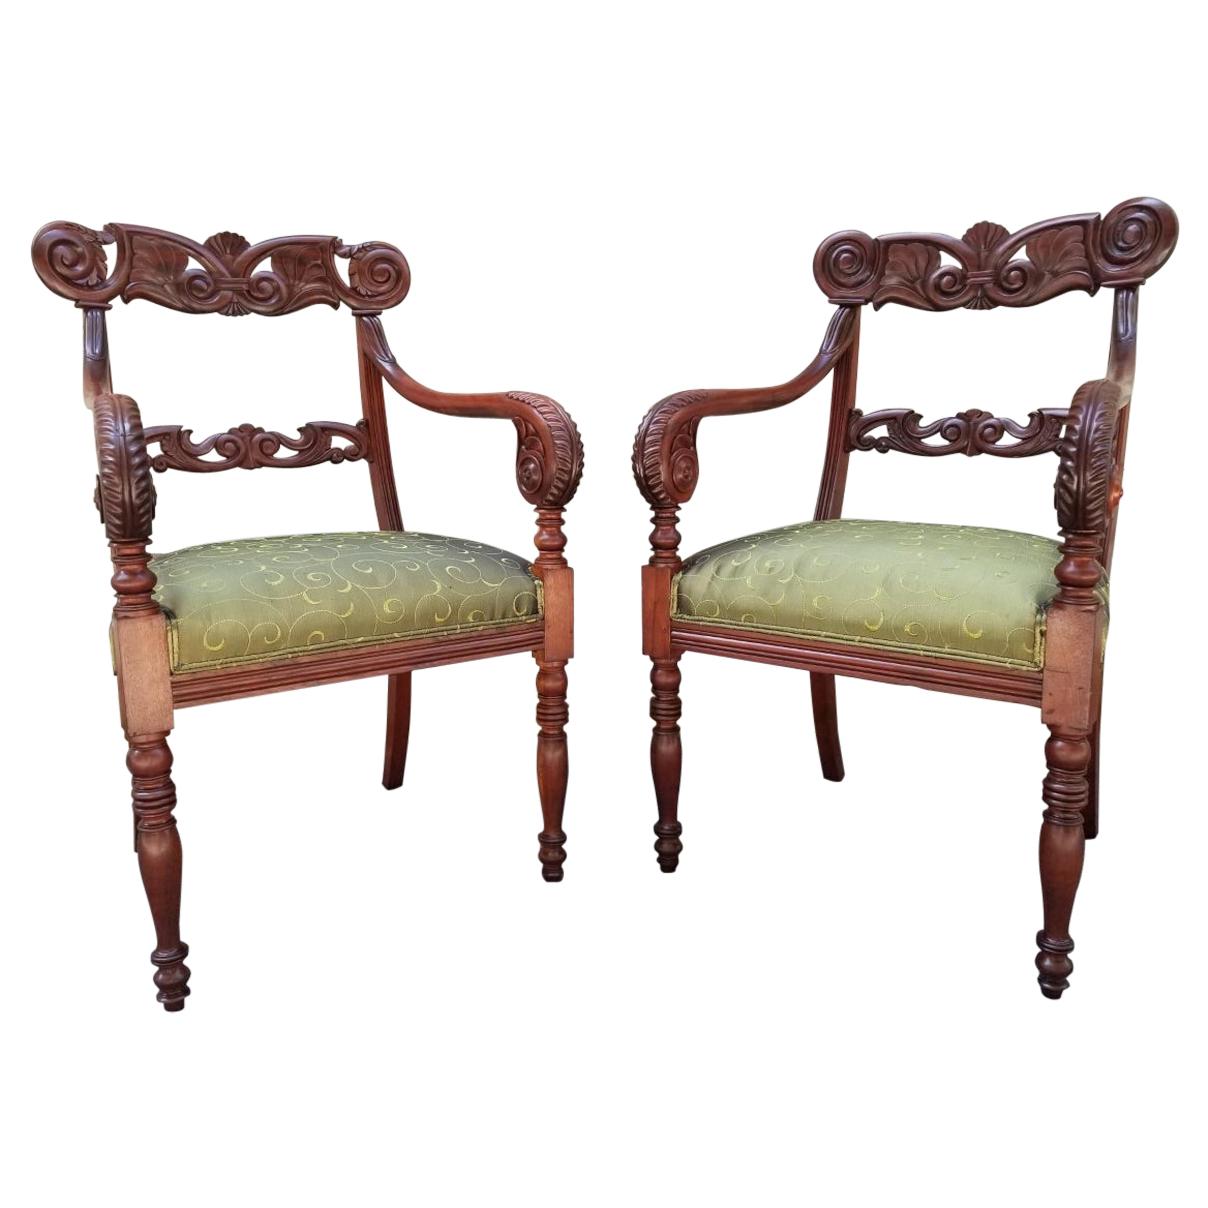 Early 19th Century Pair of Caribbean, West Indies Regency Chairs 